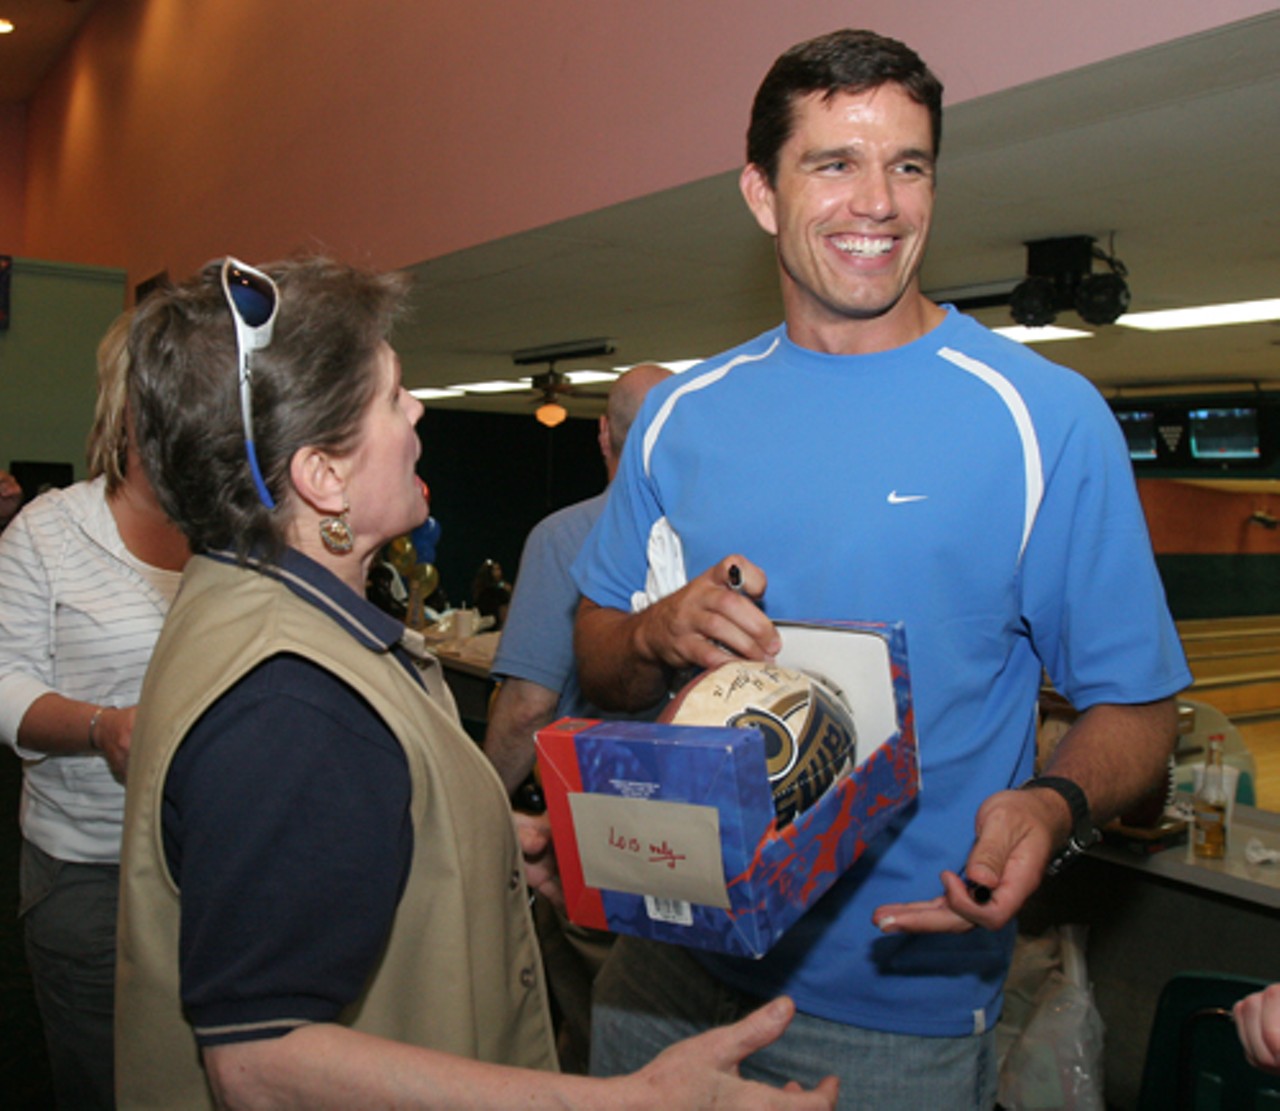 Rams quarterback Trent Green has a laugh with longtime fan, Lois Linton. She has not missed a game since the Rams moved to St. Louis, and here she&rsquo;s describing where her seats are in the dome.